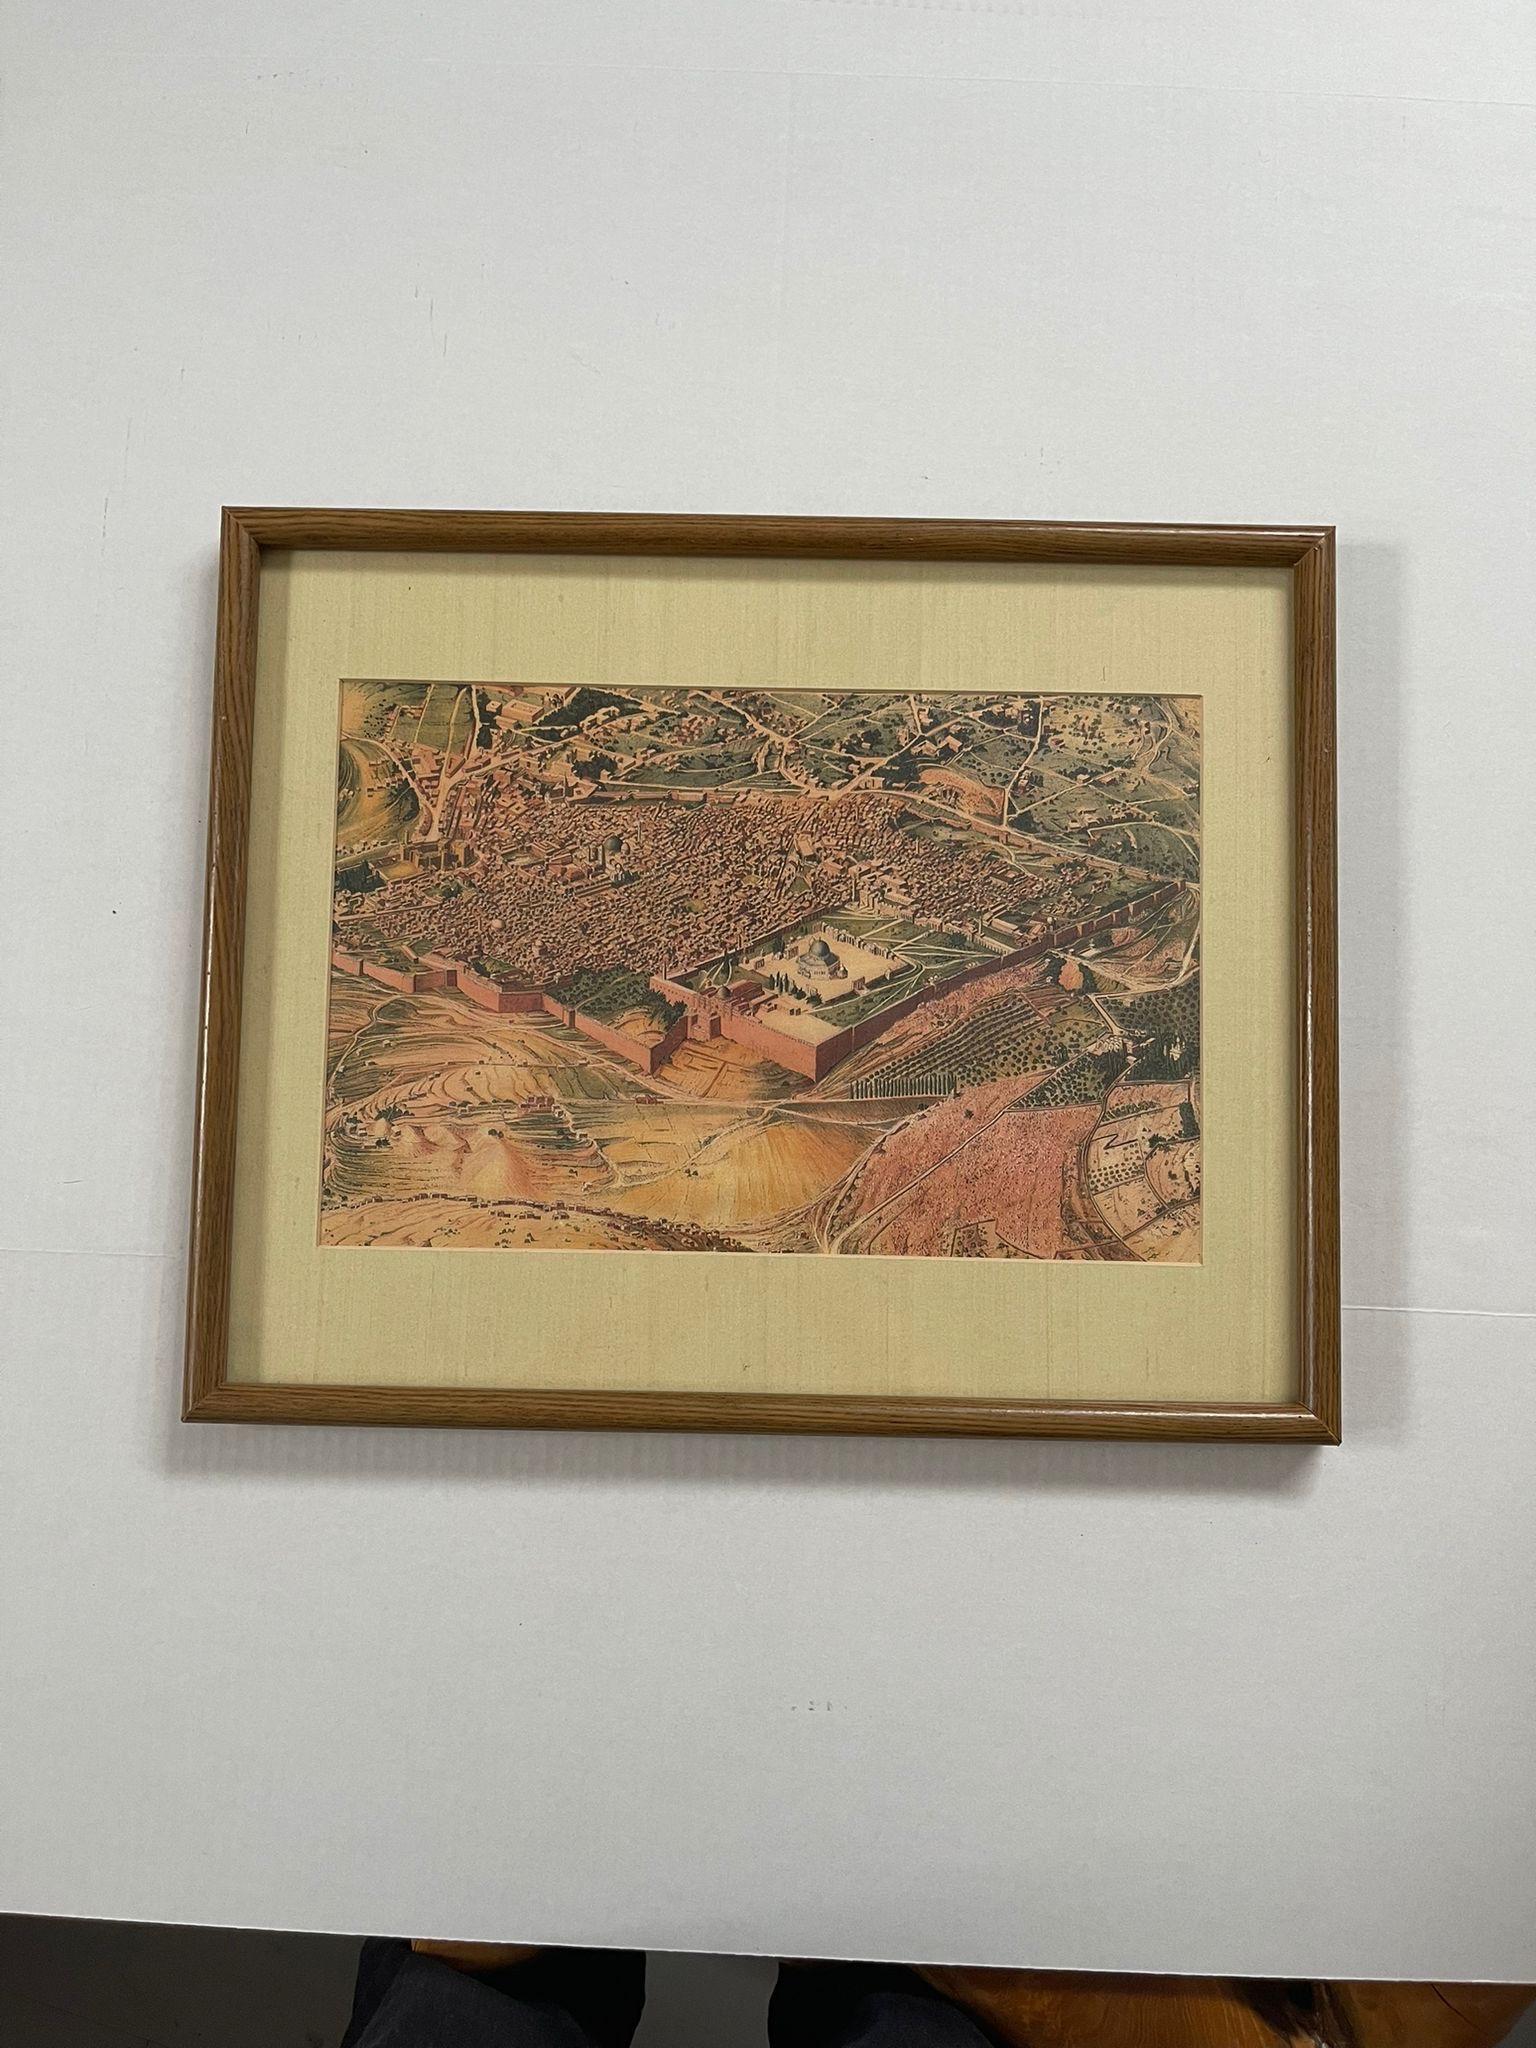 Historic Print of Original Oil Painting by Fr. & R. Stegmiller of Jerusalem in 1928. Primarily Red and Yellow Tones as Pictured. Vintage Condition Consistent with Age as Pictured.

Dimensions. 21 W ; 1/2 D ; 17 H